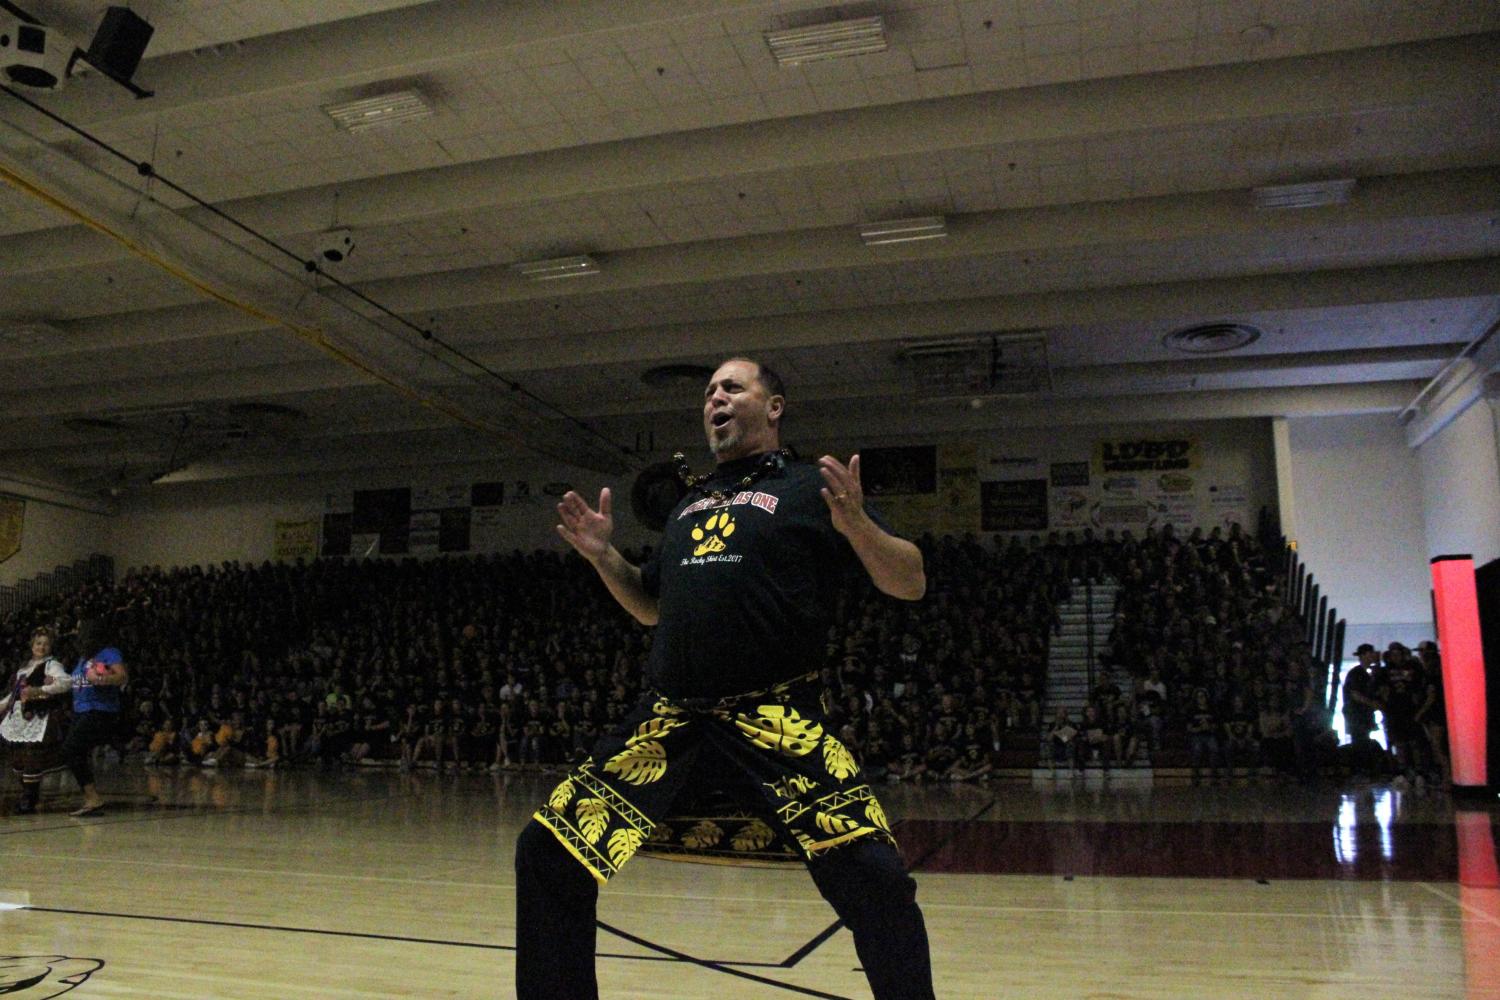 Mr. Liufau helping out with the homecoming reveal at the back to school assembly.